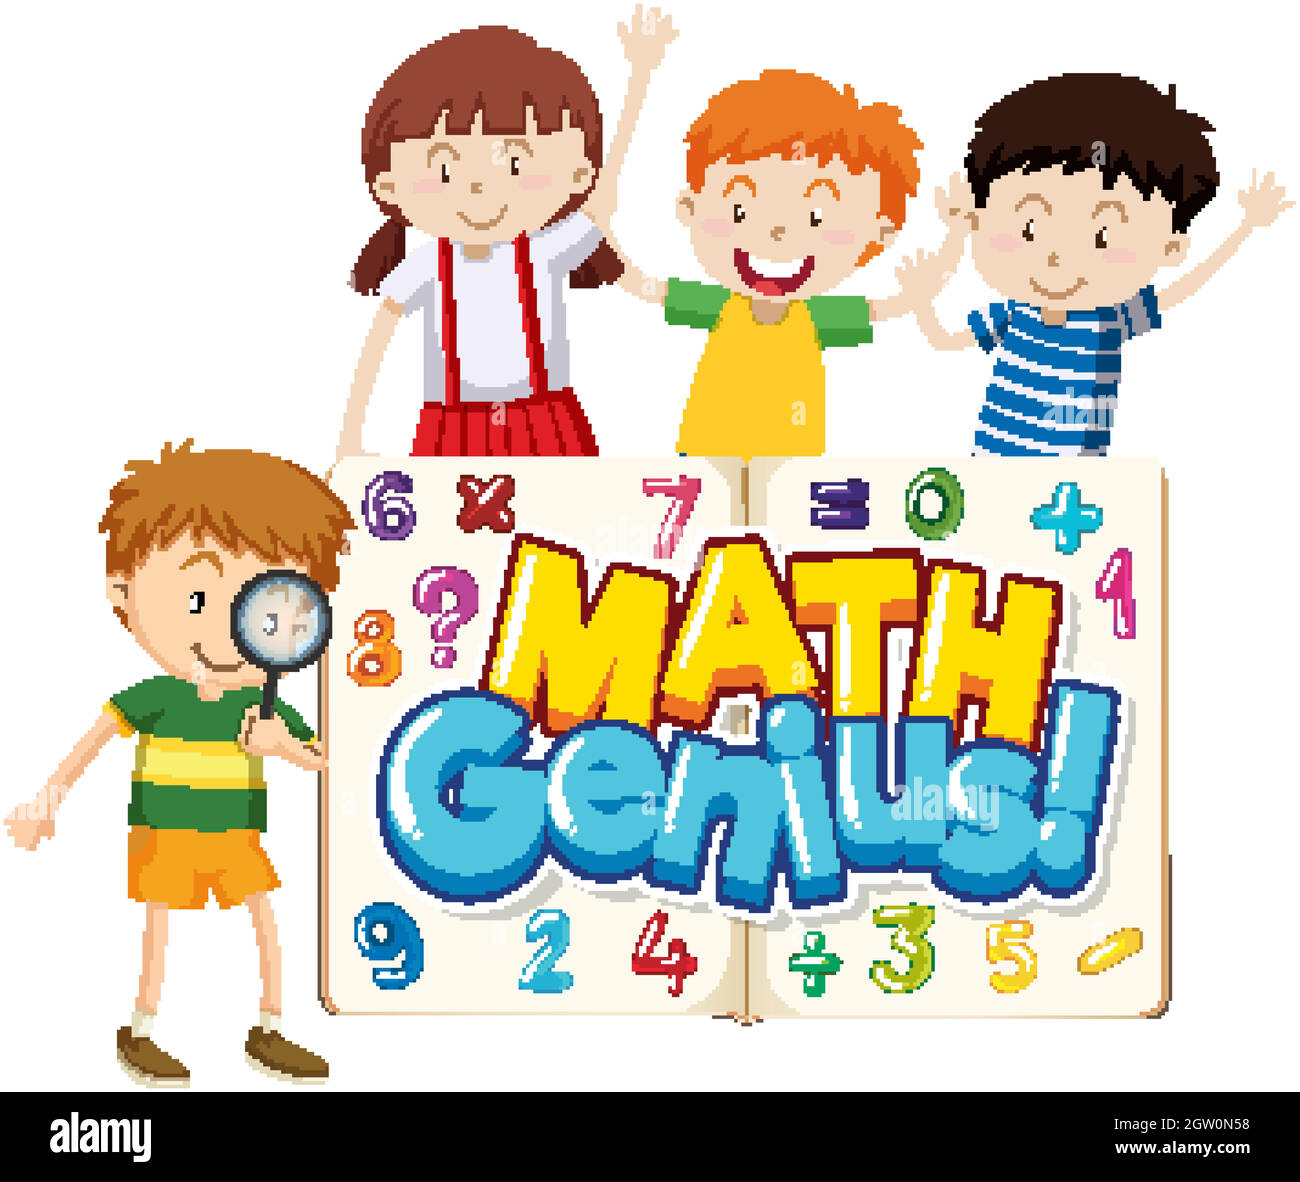 Font Design For Word Math Genius With Cute Children Stock Vector Image